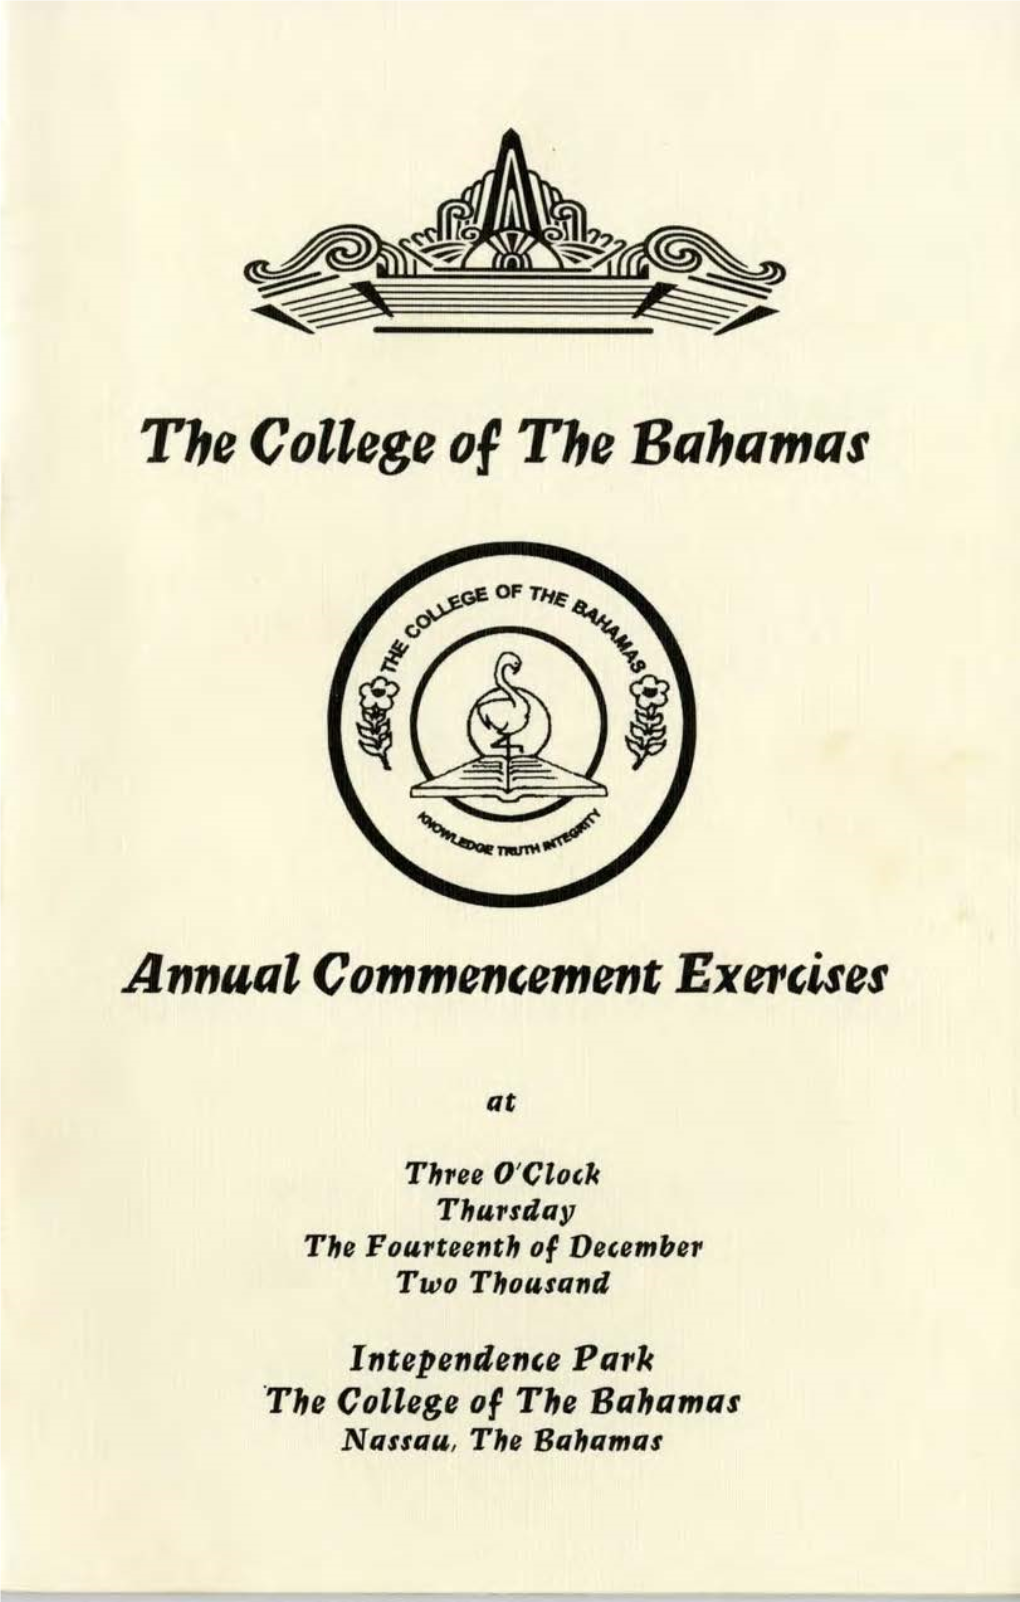 The College of the Bahamas